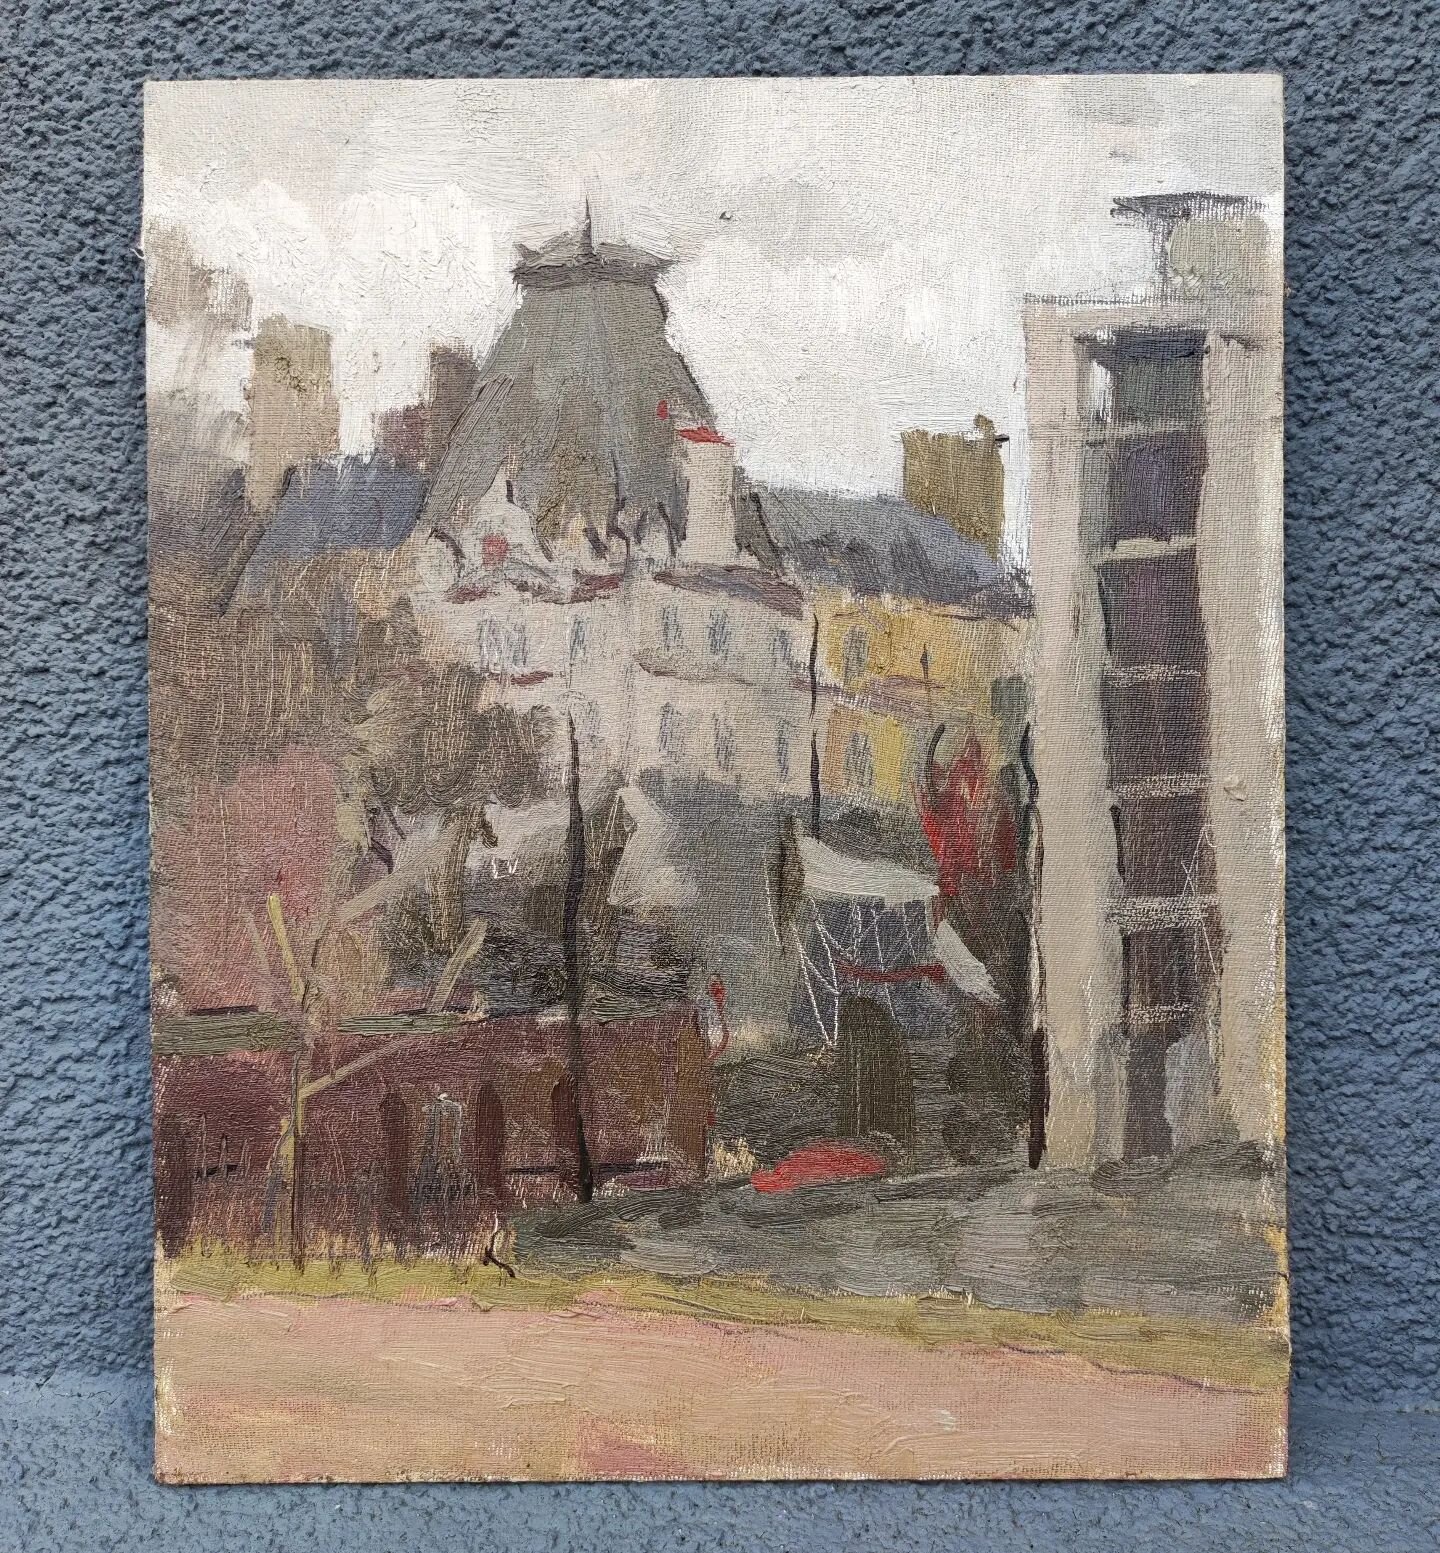 Mansion on Grosvenor Place
Oil on muslin board, 22 x 27cm

I like the roof - reminds me of Hopper's &quot;House by the Railroad&quot;.

Made on 4 March 2023 from Hyde Park Corner in the bitter cold. Palette: Transparent Oxide Yellow, Cadmium Red, and